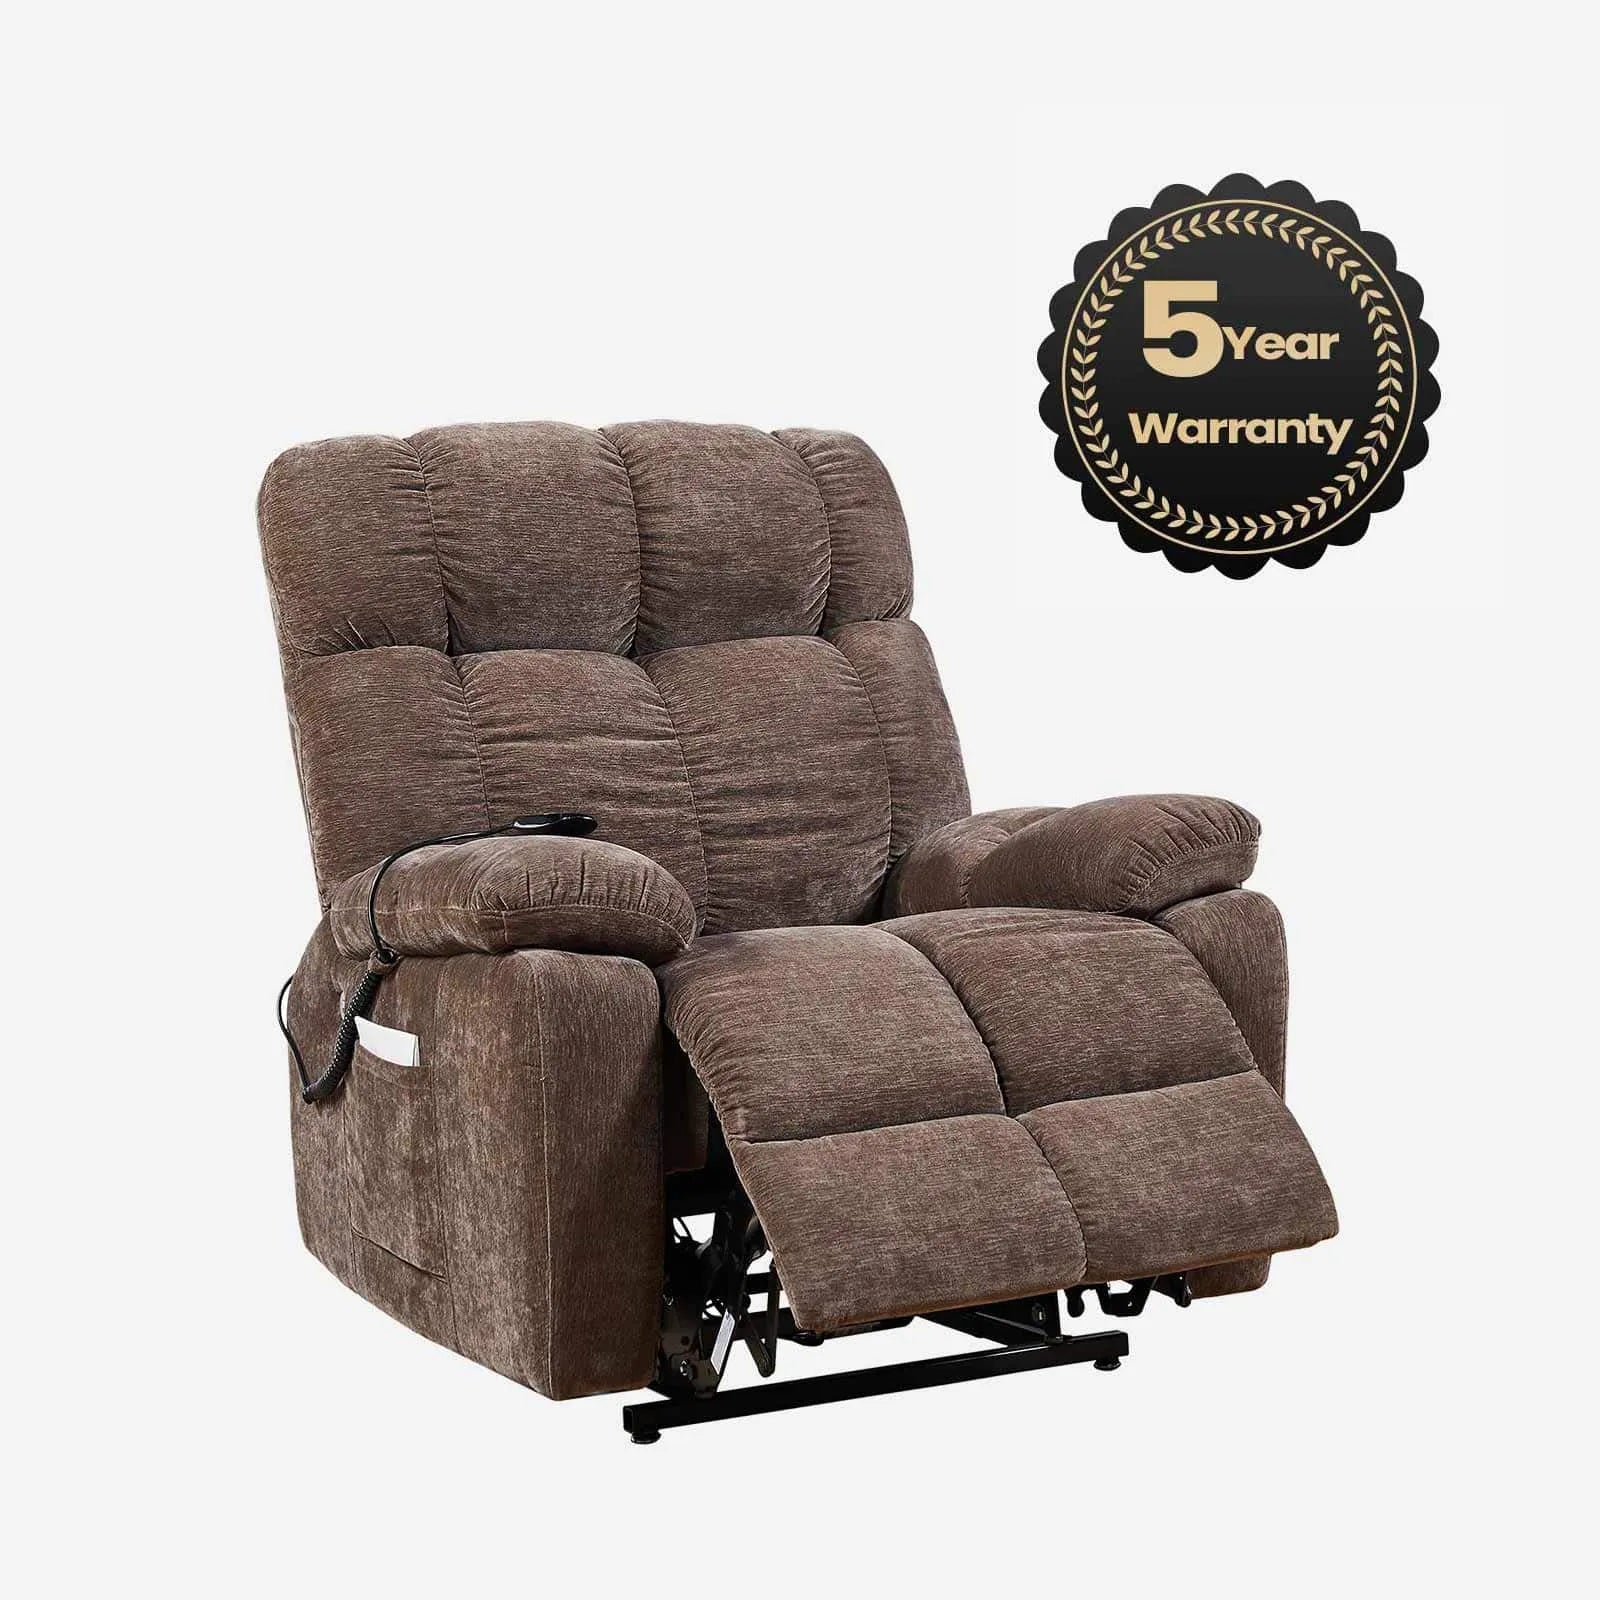 lay flat power lift recliner chairs with 5 year warranty